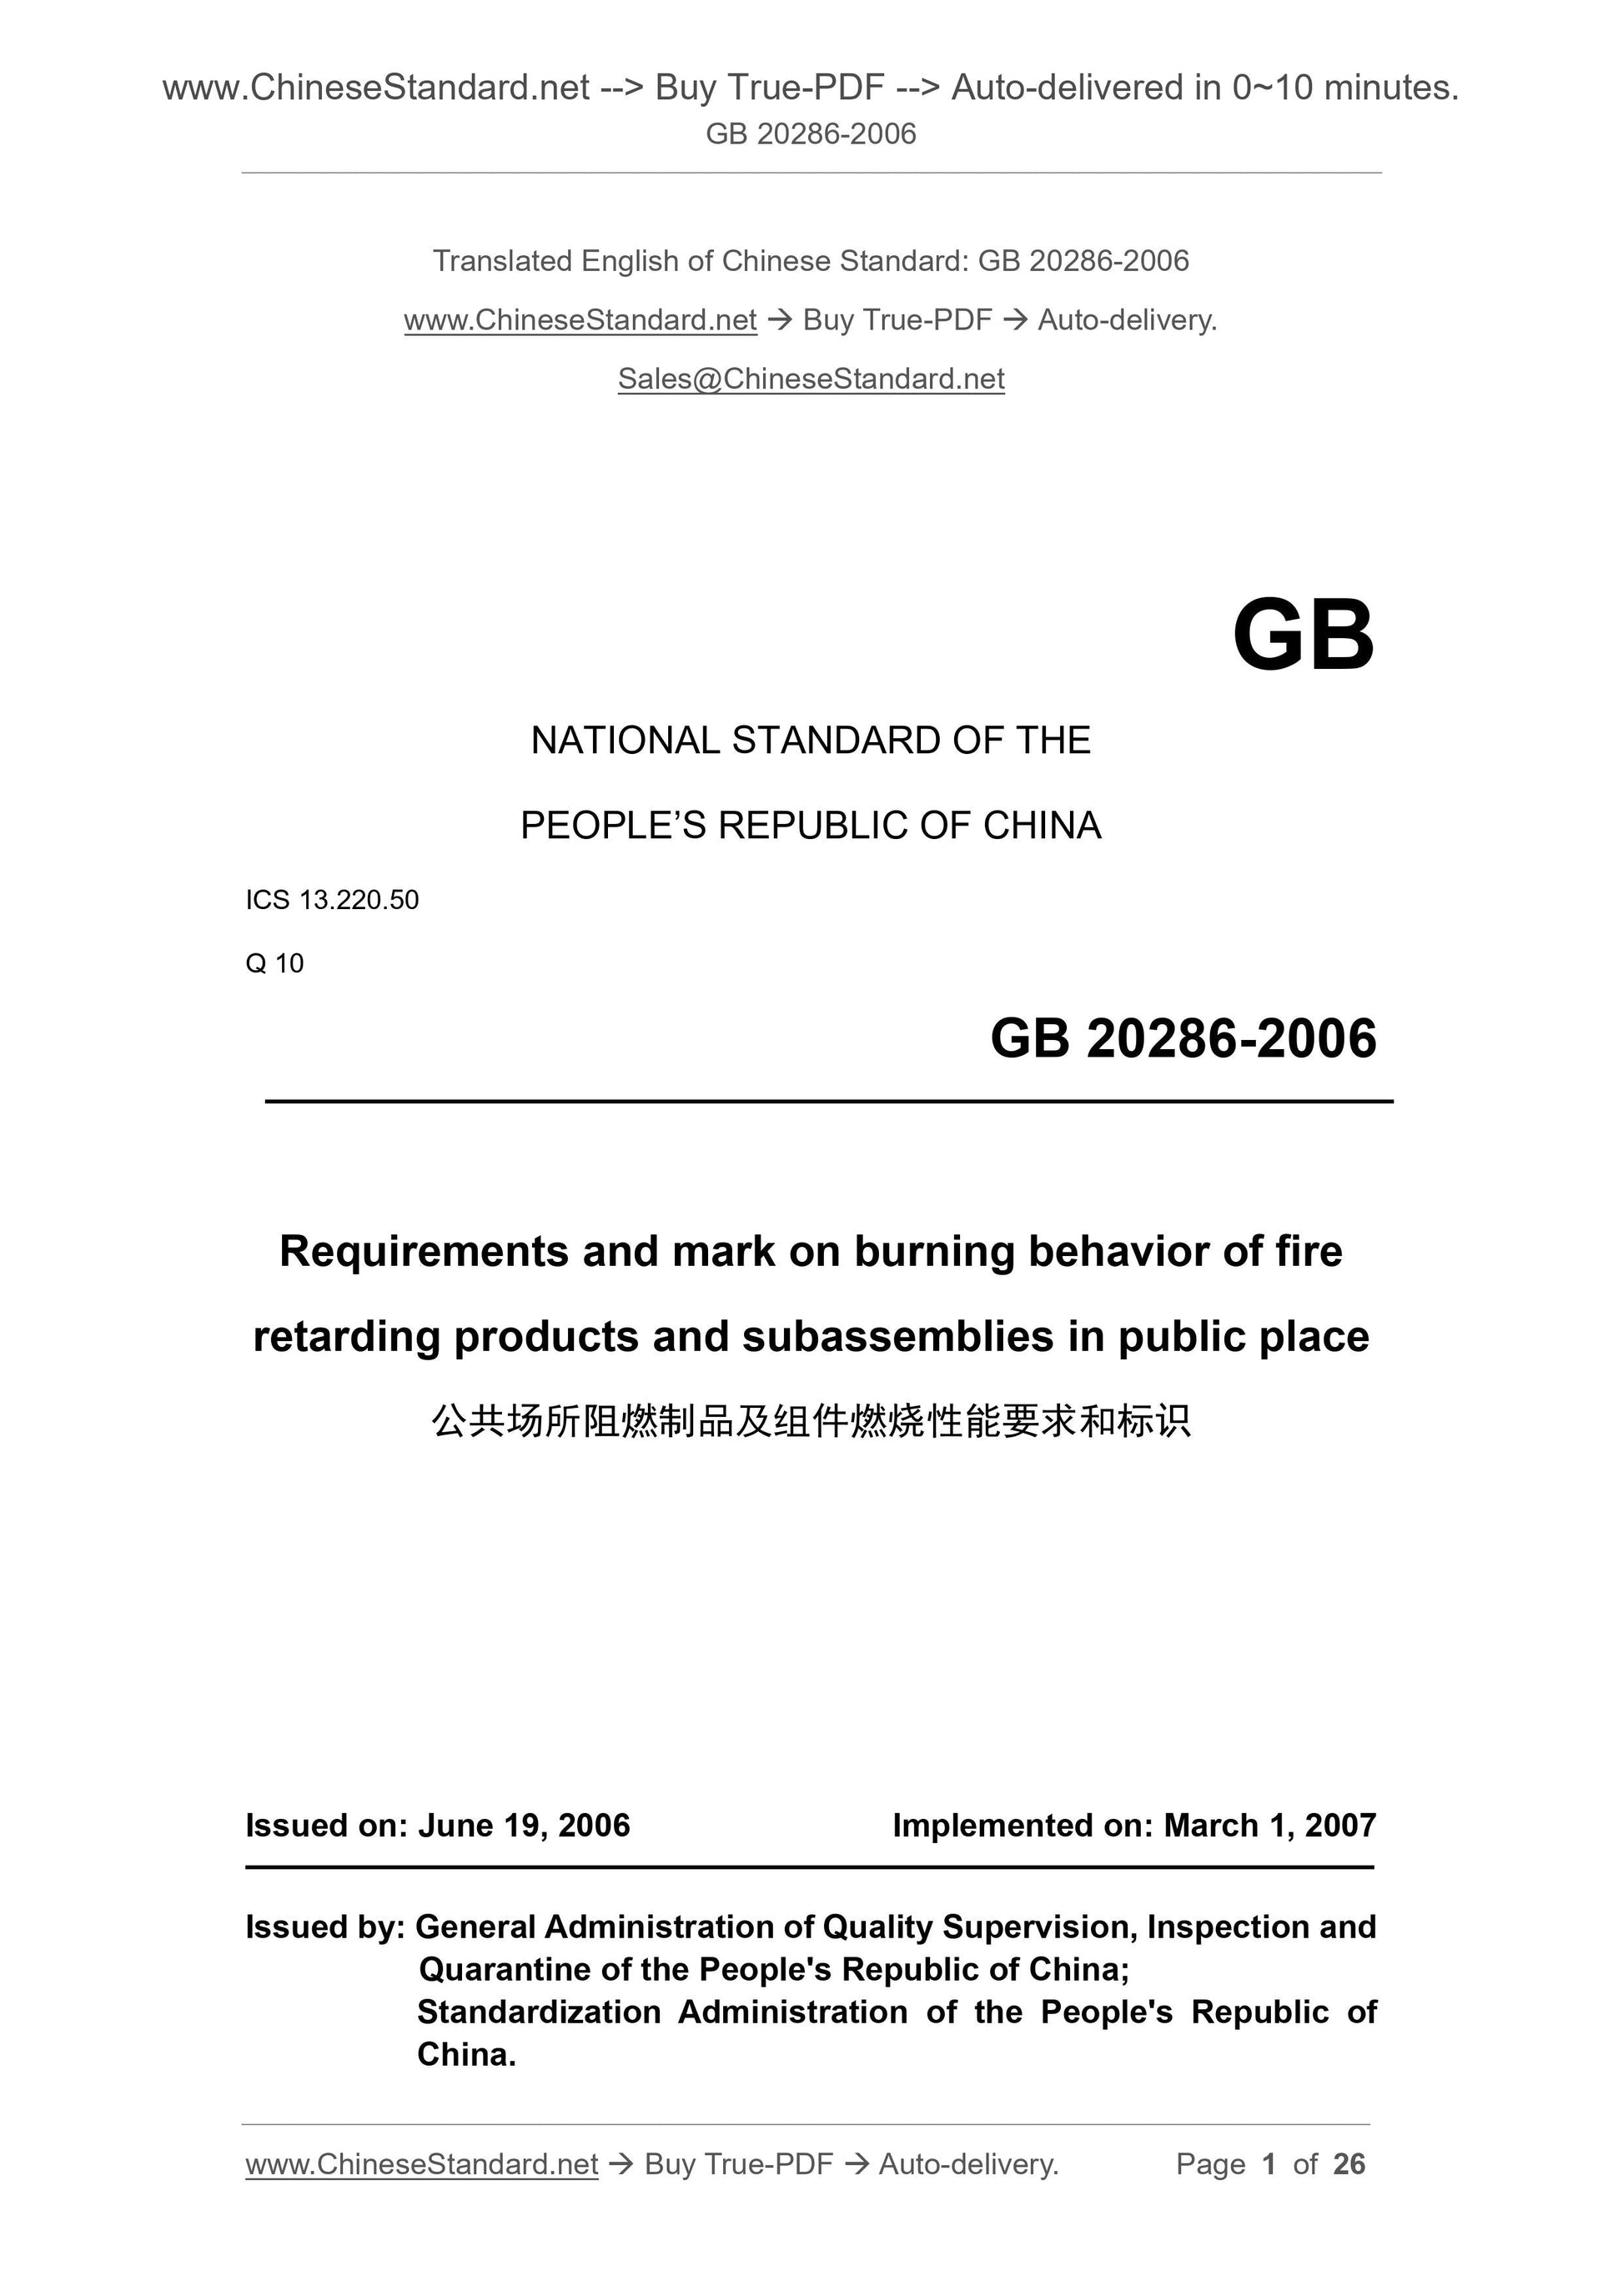 GB 20286-2006 Page 1